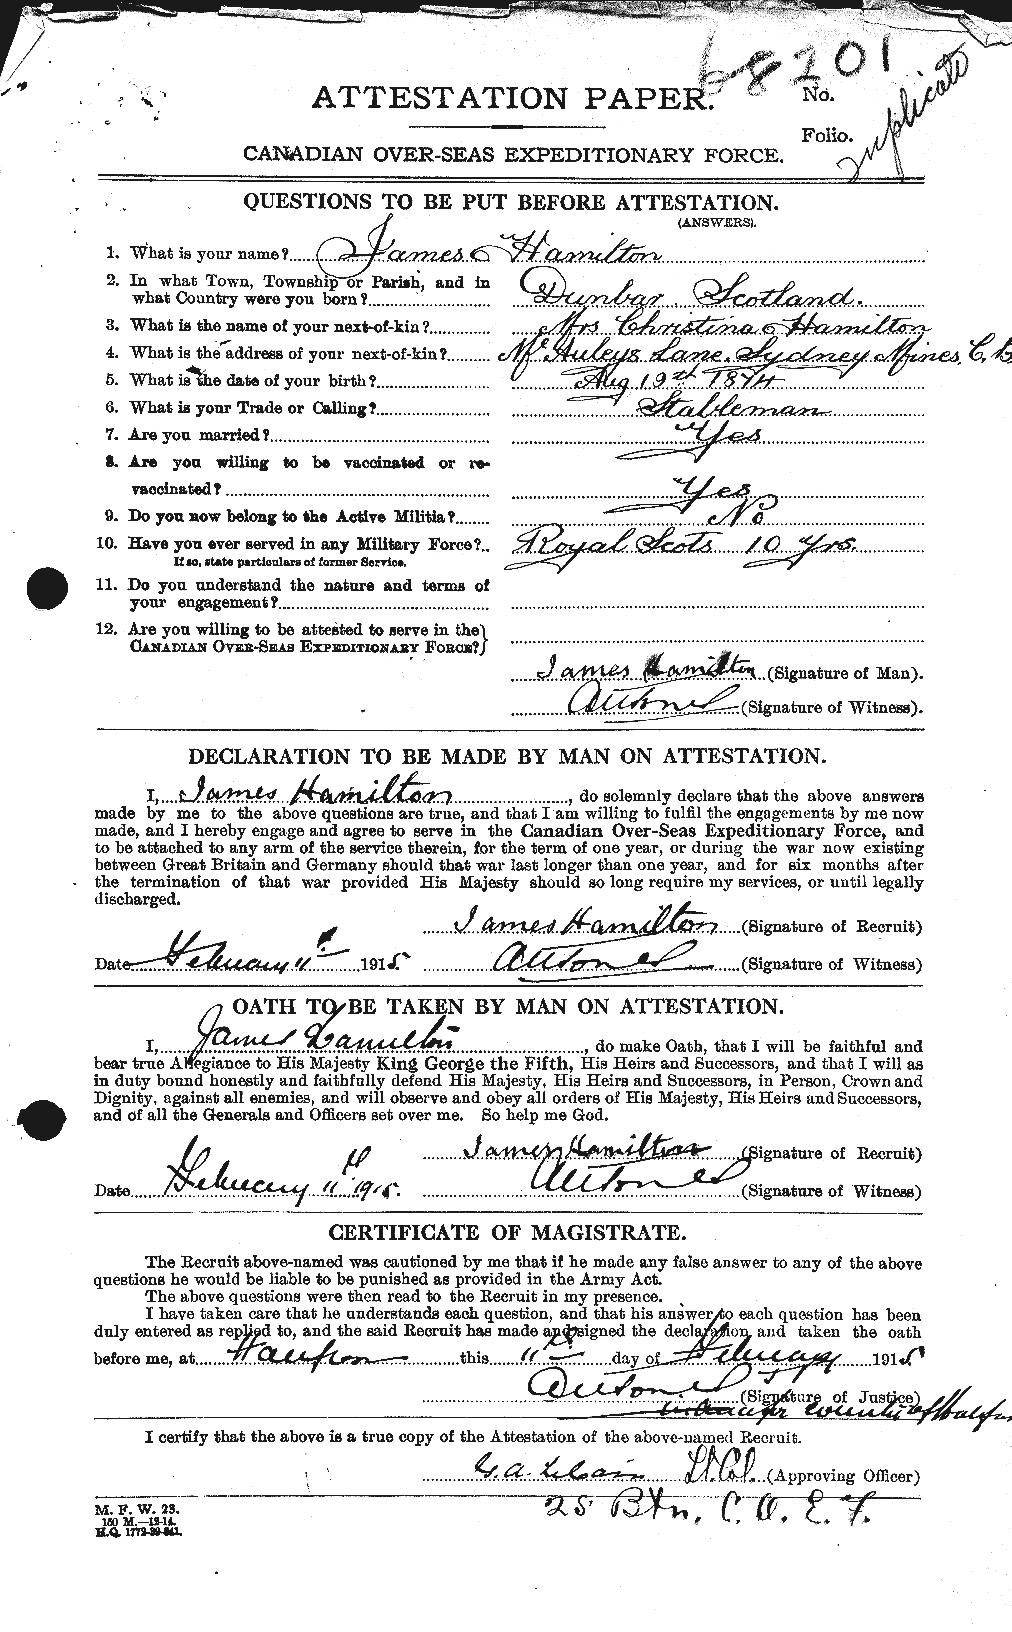 Personnel Records of the First World War - CEF 372940a